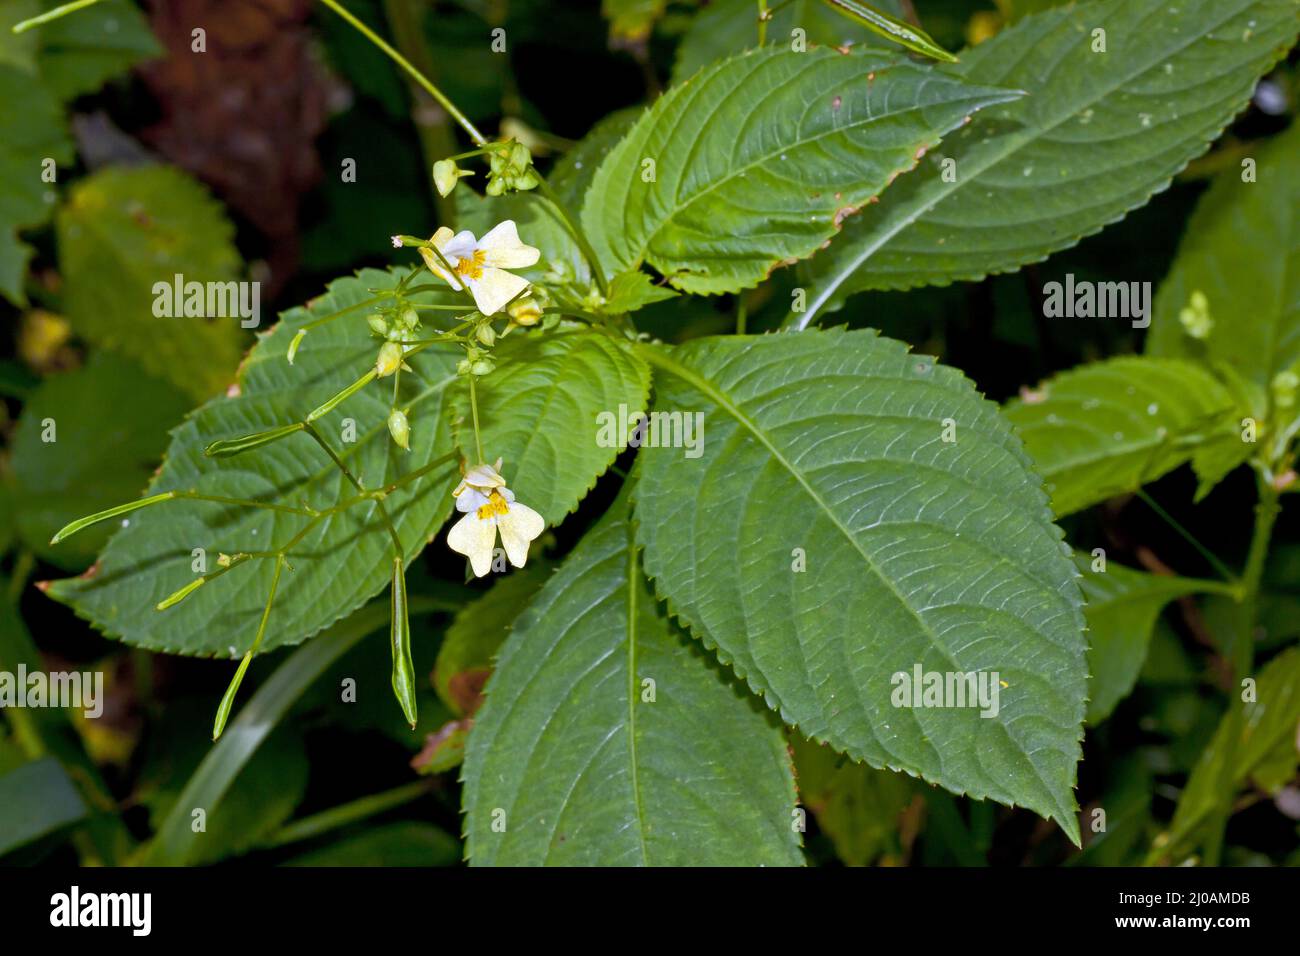 Impatiens parviflora, Small-flowered Touch-me-mot Stock Photo